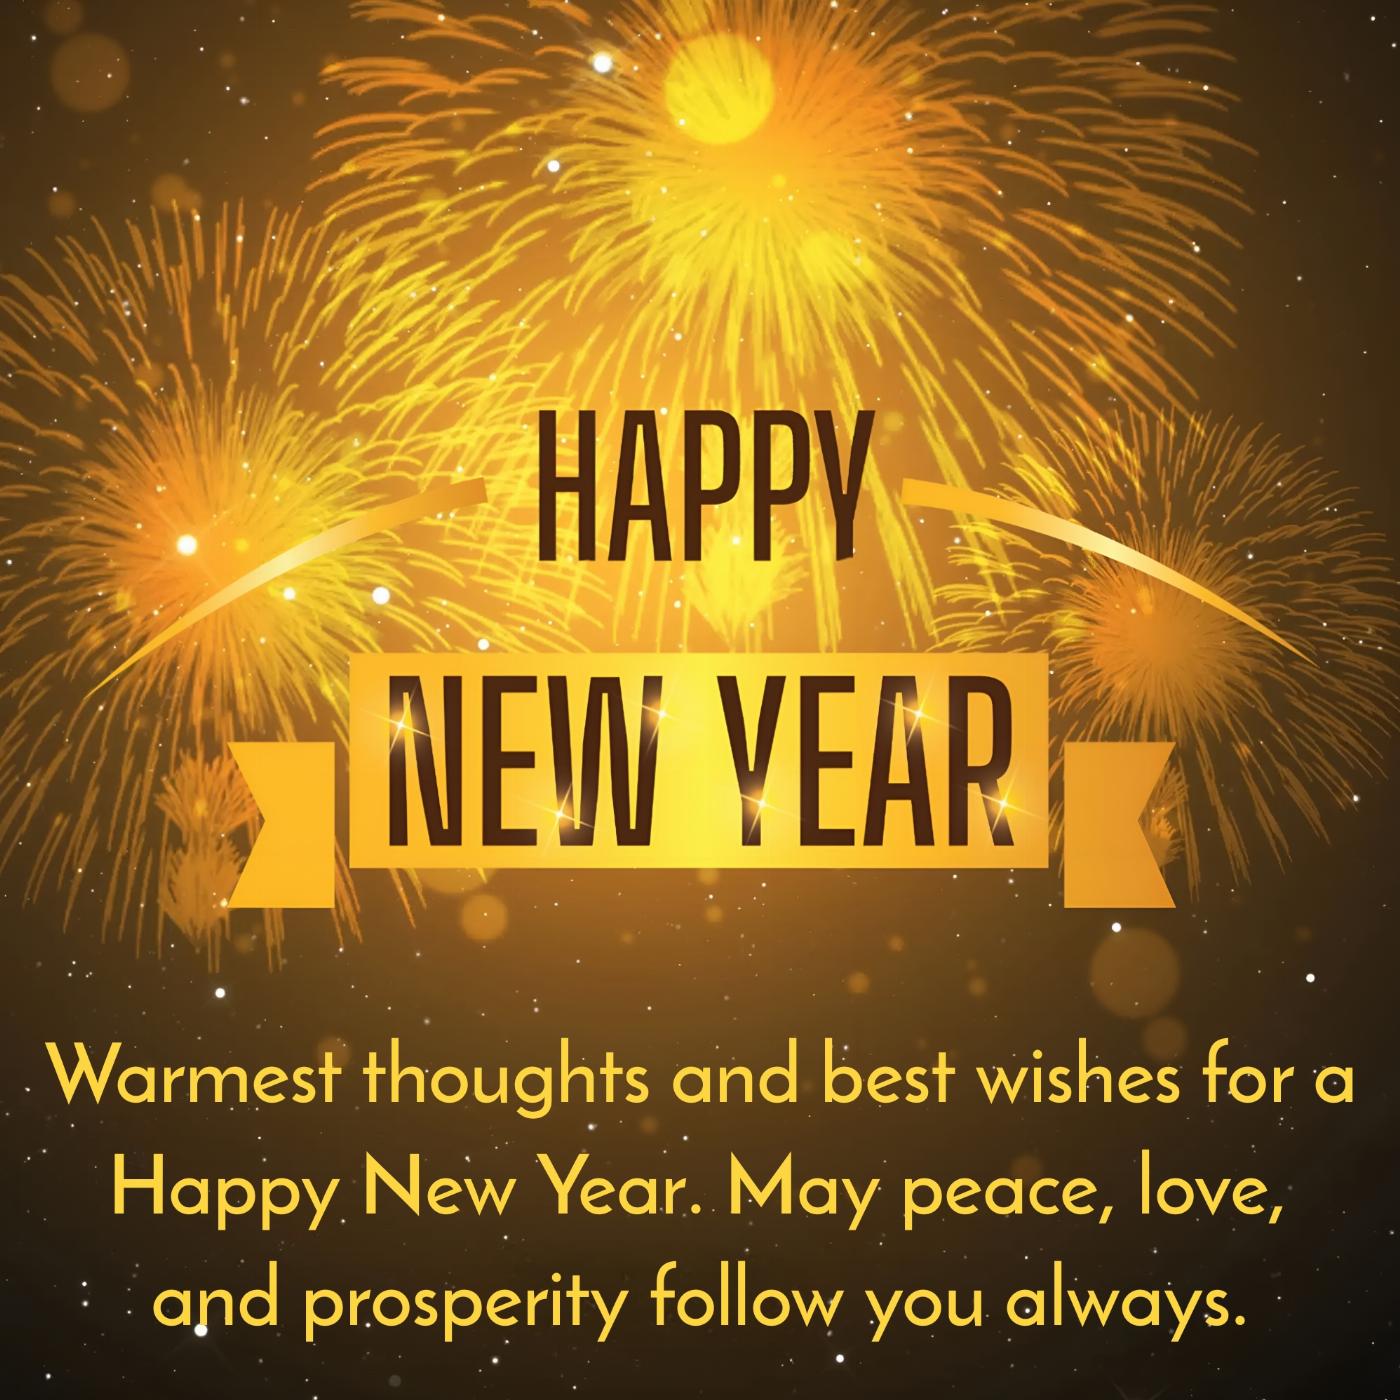 Warmest thoughts and best wishes for a Happy New Year